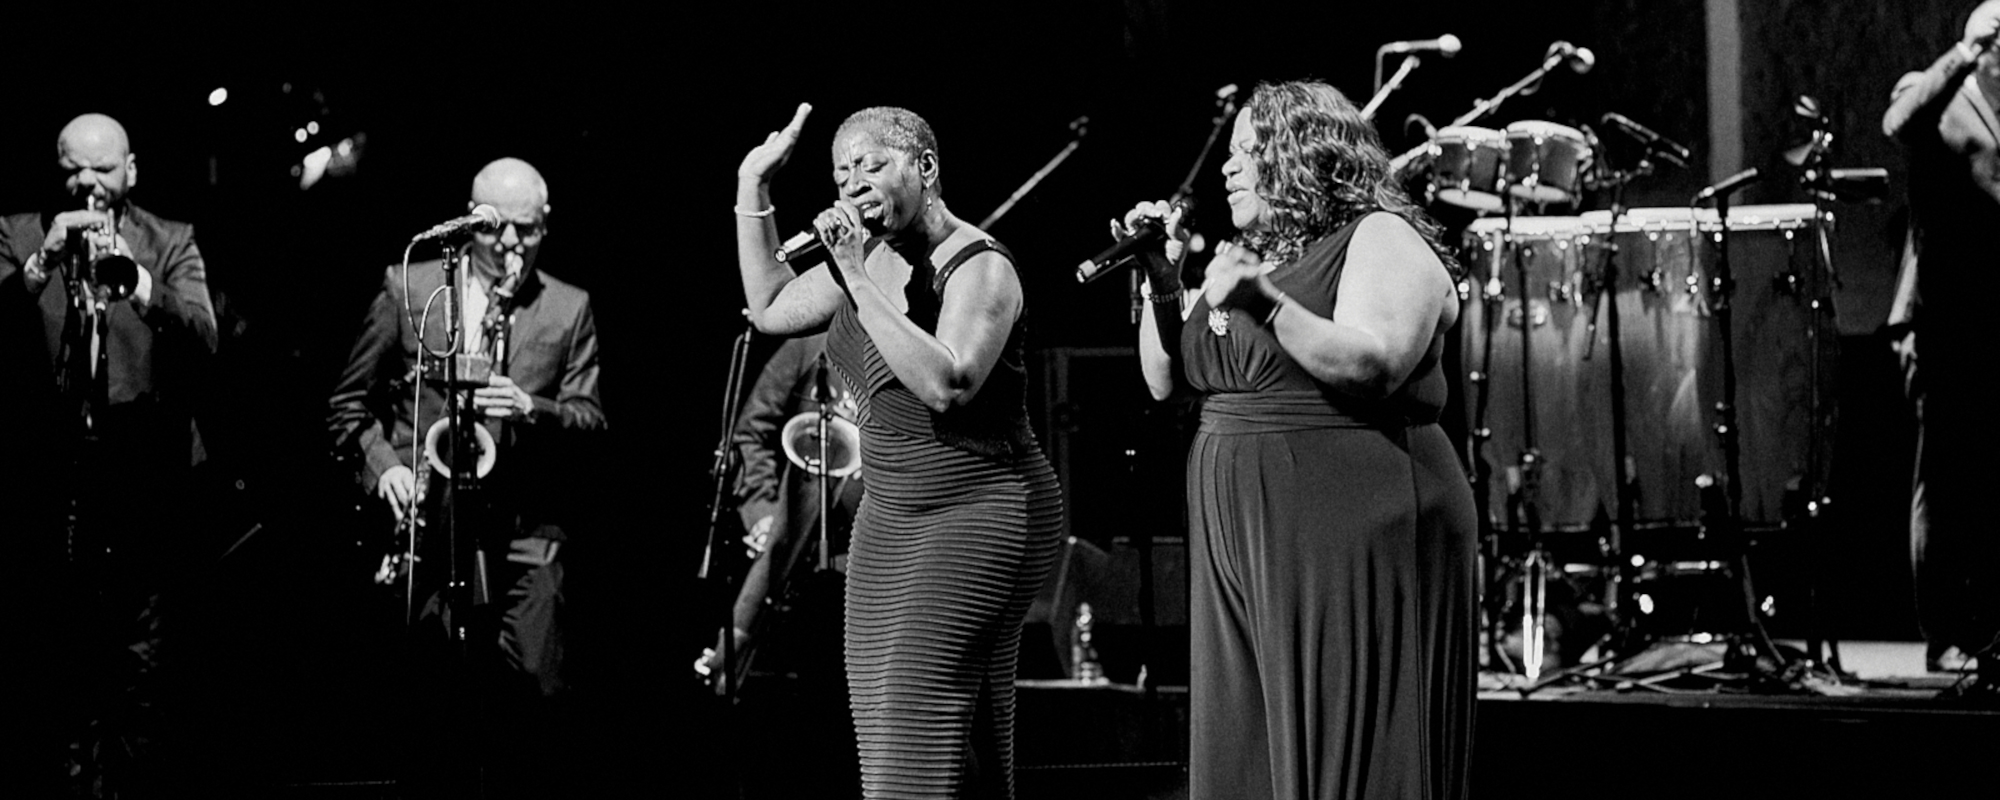 Review: Daptone Celebrates 20 Years with Spectacular ‘Souled Out’ 2014 Live Performance